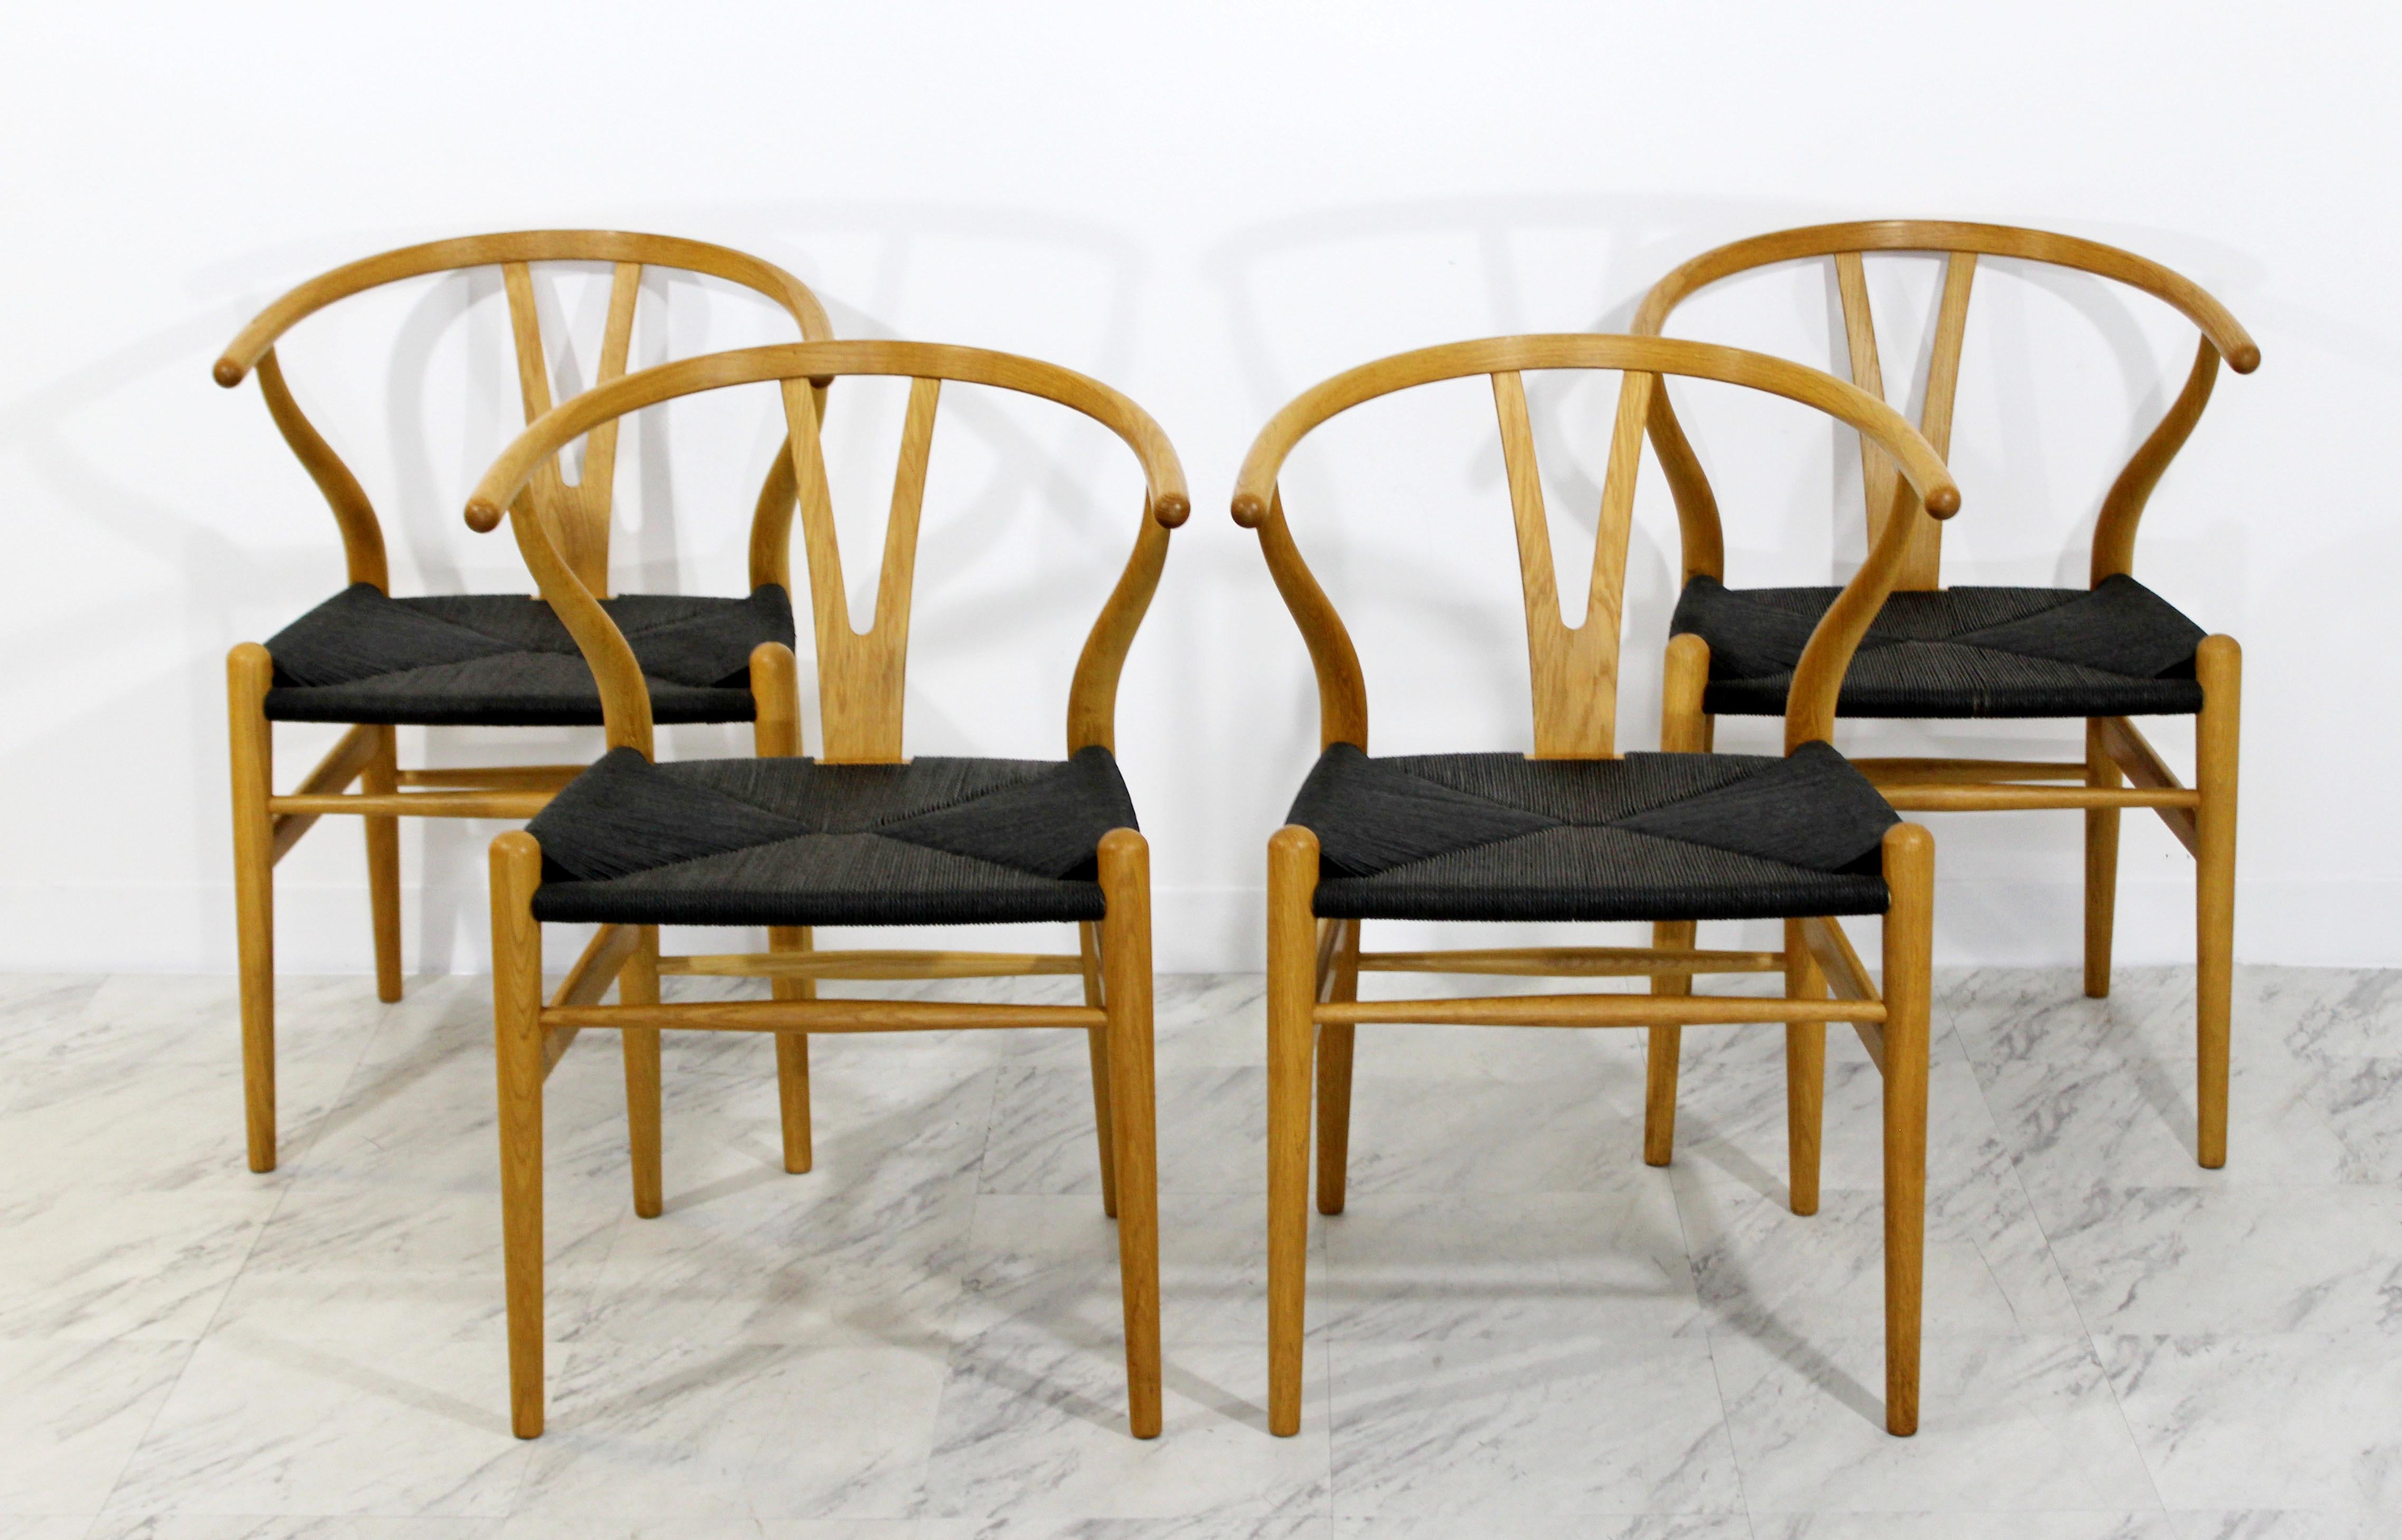 For your consideration is a marvelous, set of four, original, wishbone CH24, dining chairs, made of curved oak and black rush or cord, by Hans Wegner for Carl Hansen, made in Denmark these are the patented newer reproduction . In excellent